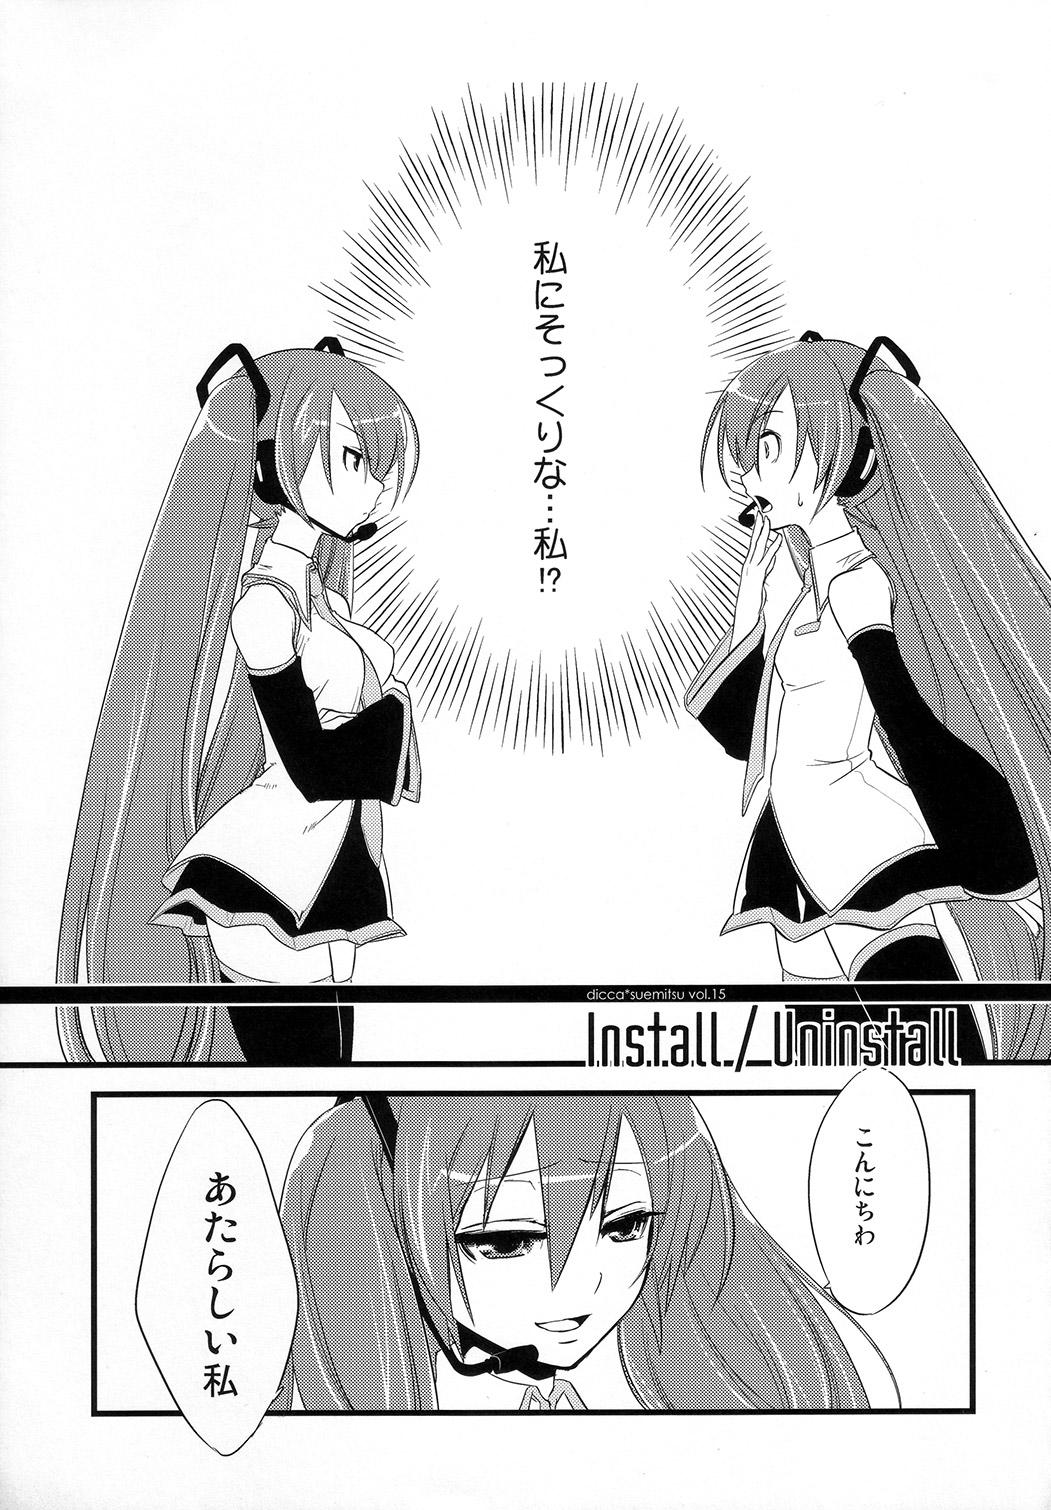 Reversecowgirl Install/Uninstall - Vocaloid Fake Tits - Page 10